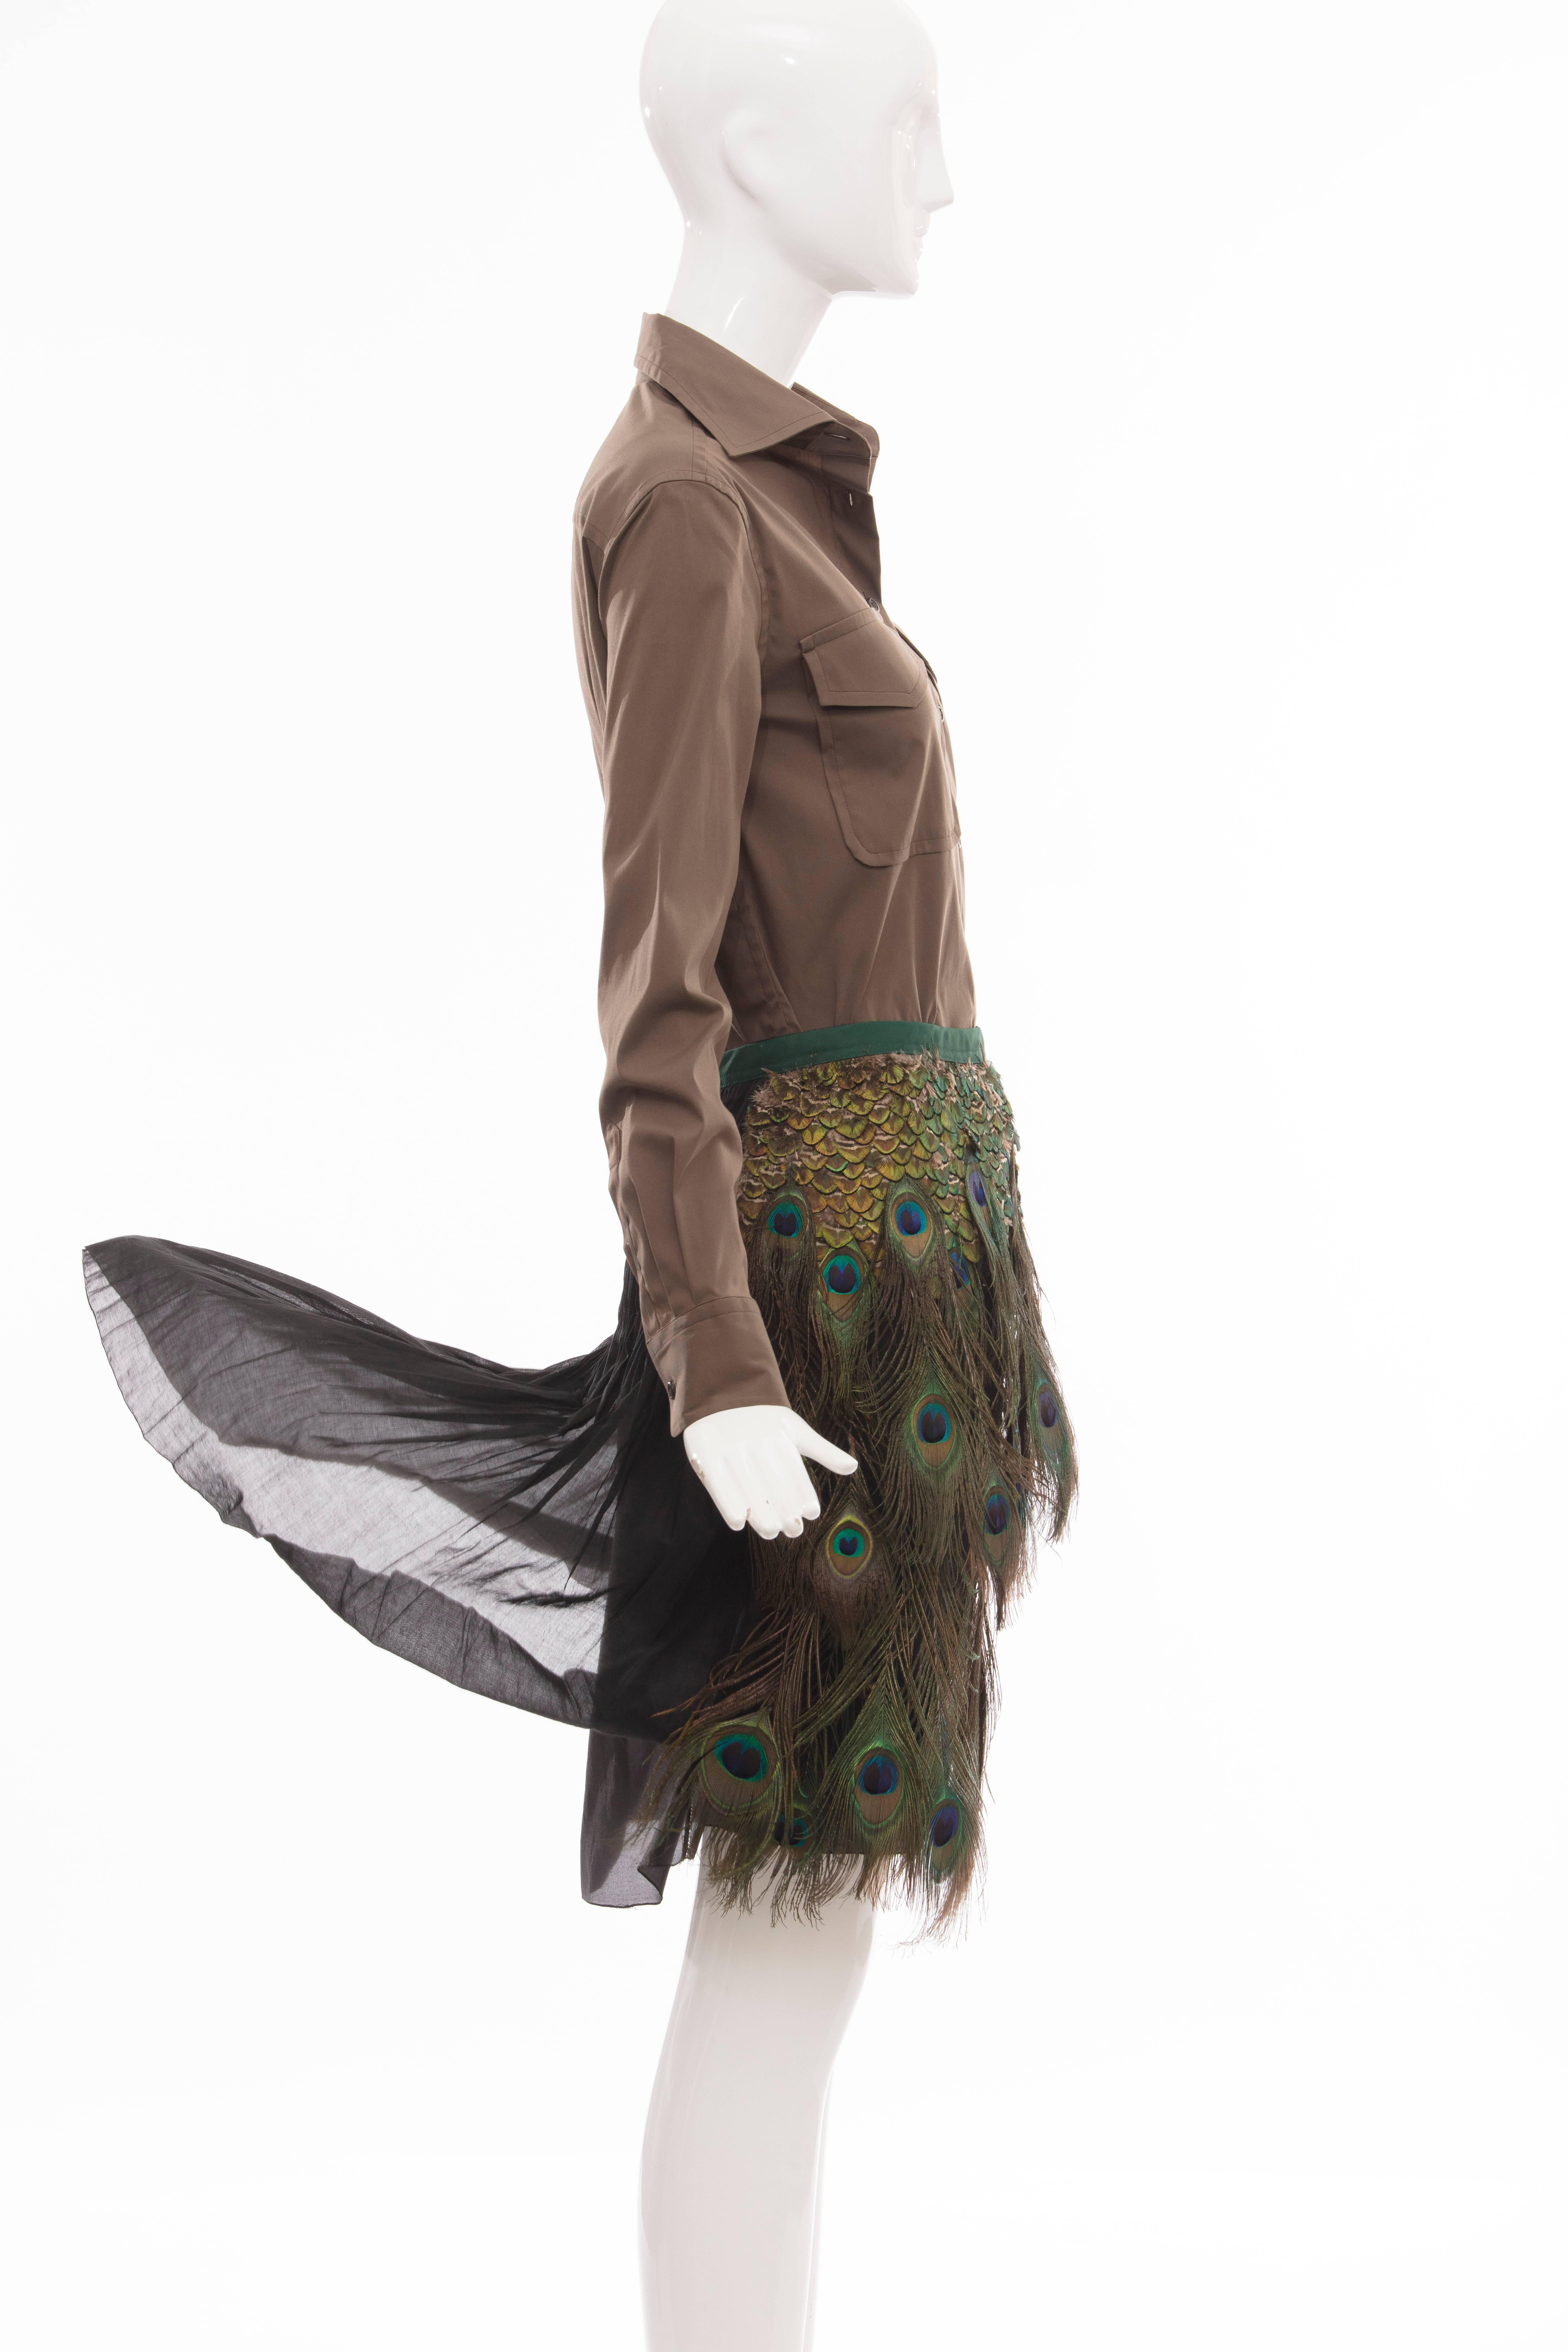 Prada Runway Cotton Button Front Top & Peacock Feather A-Line Skirt, Spring 2005 For Sale 1